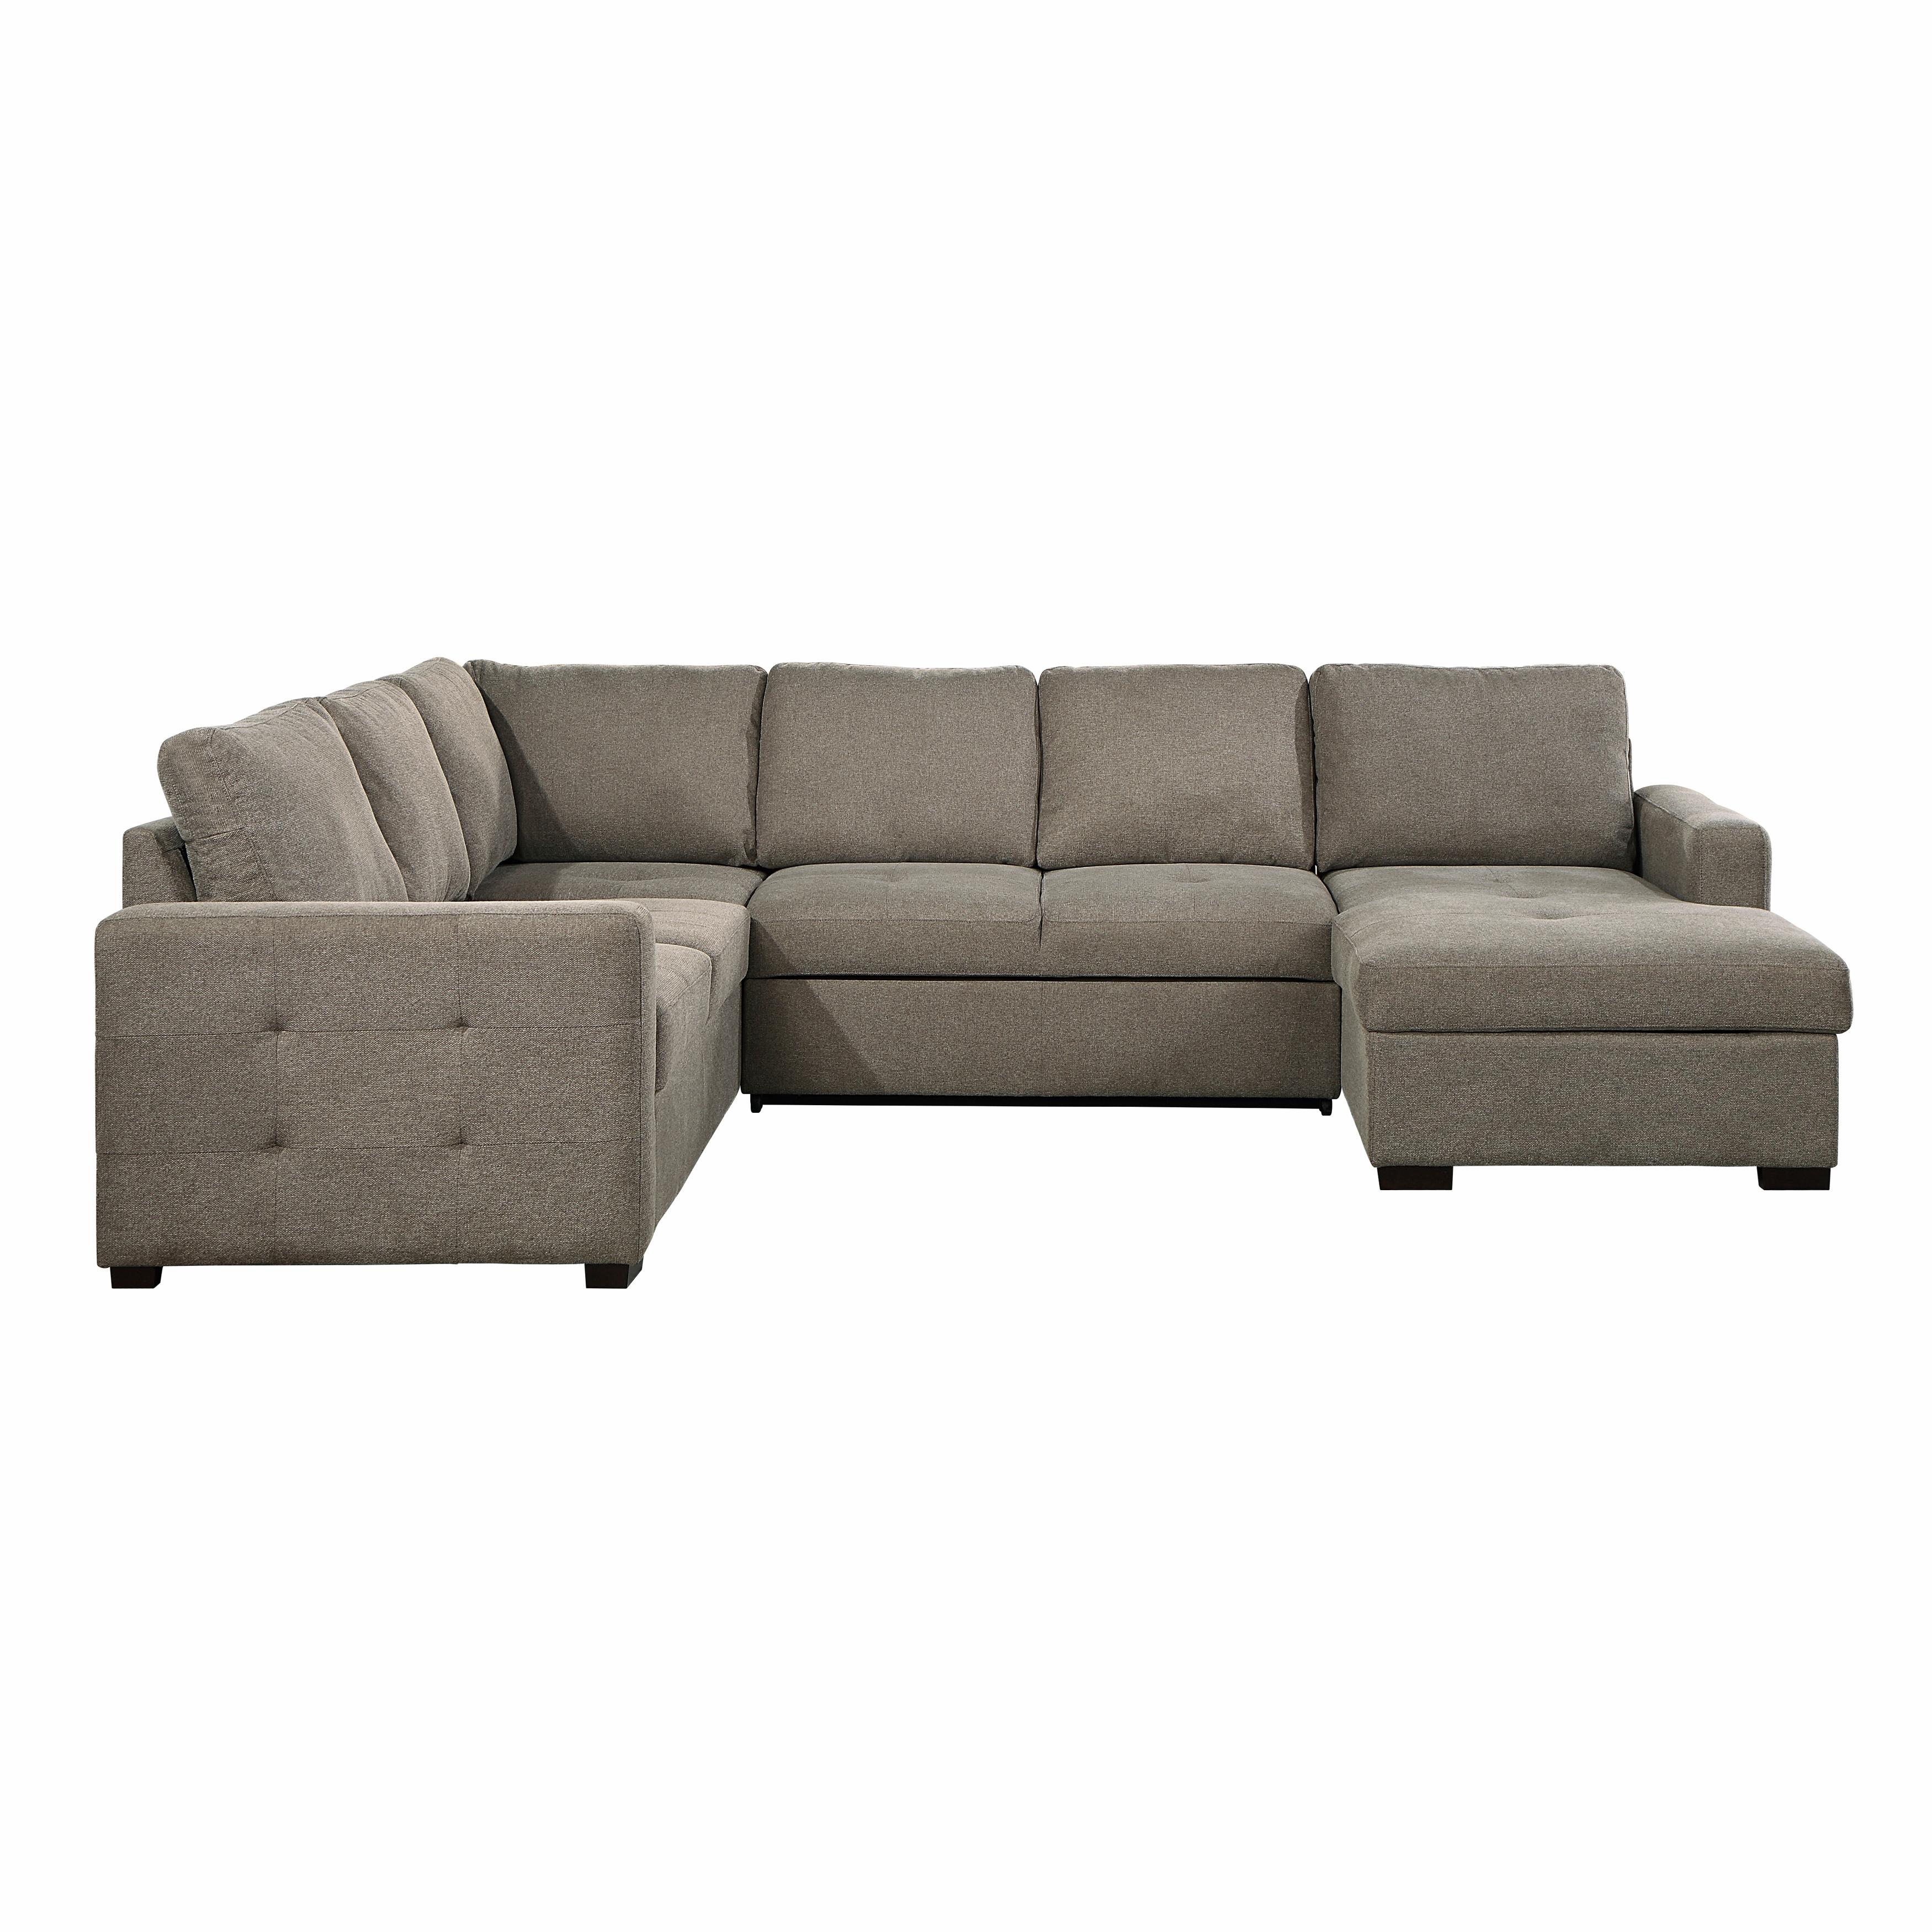 Transitional Sectional 9206BR*33LRC Elton 9206BR*33LRC in Brown 